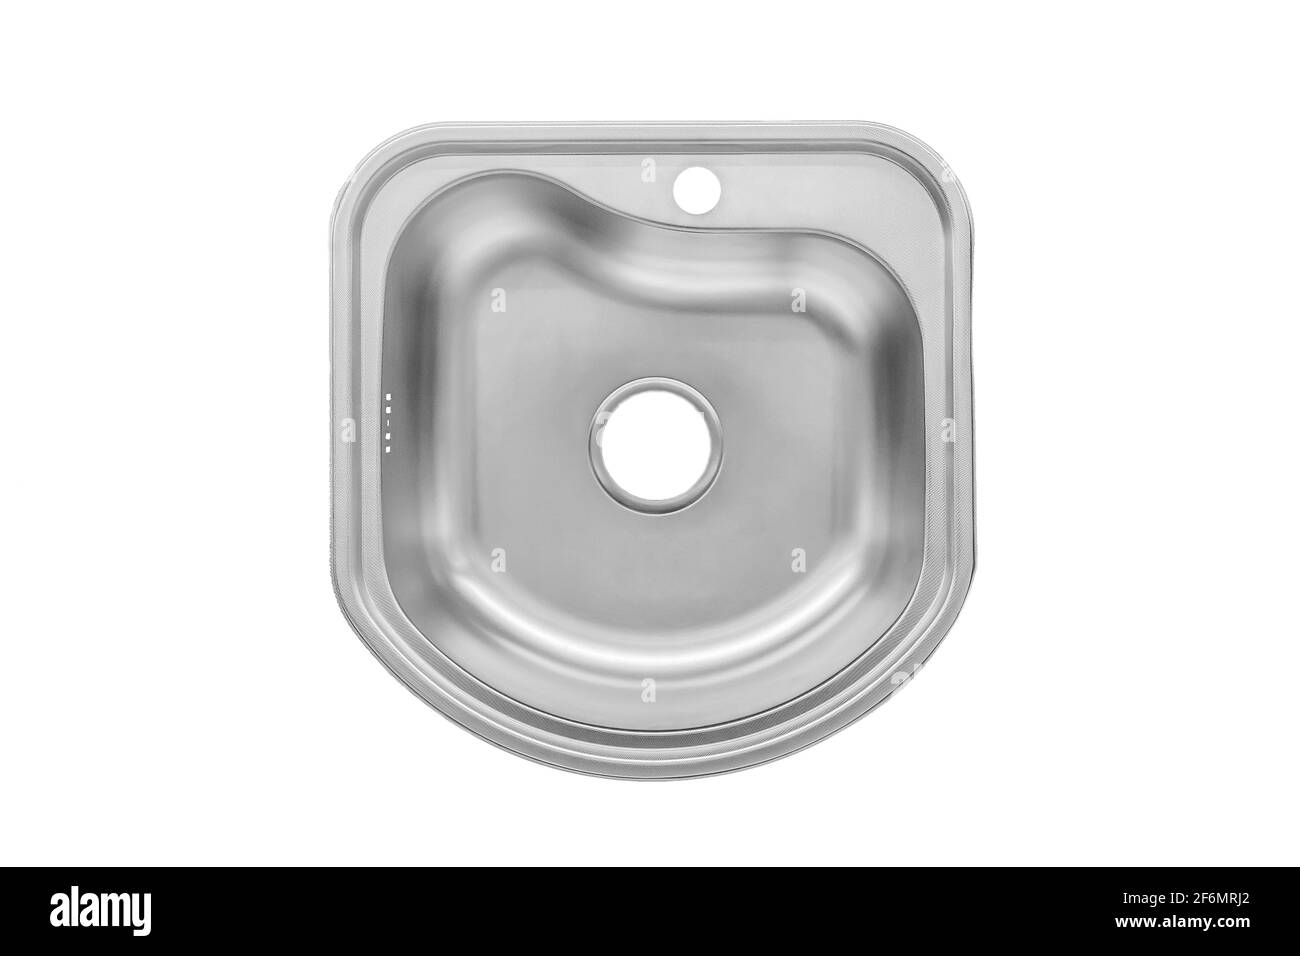 New modern silver color metal sink isolated on white background. Stock Photo